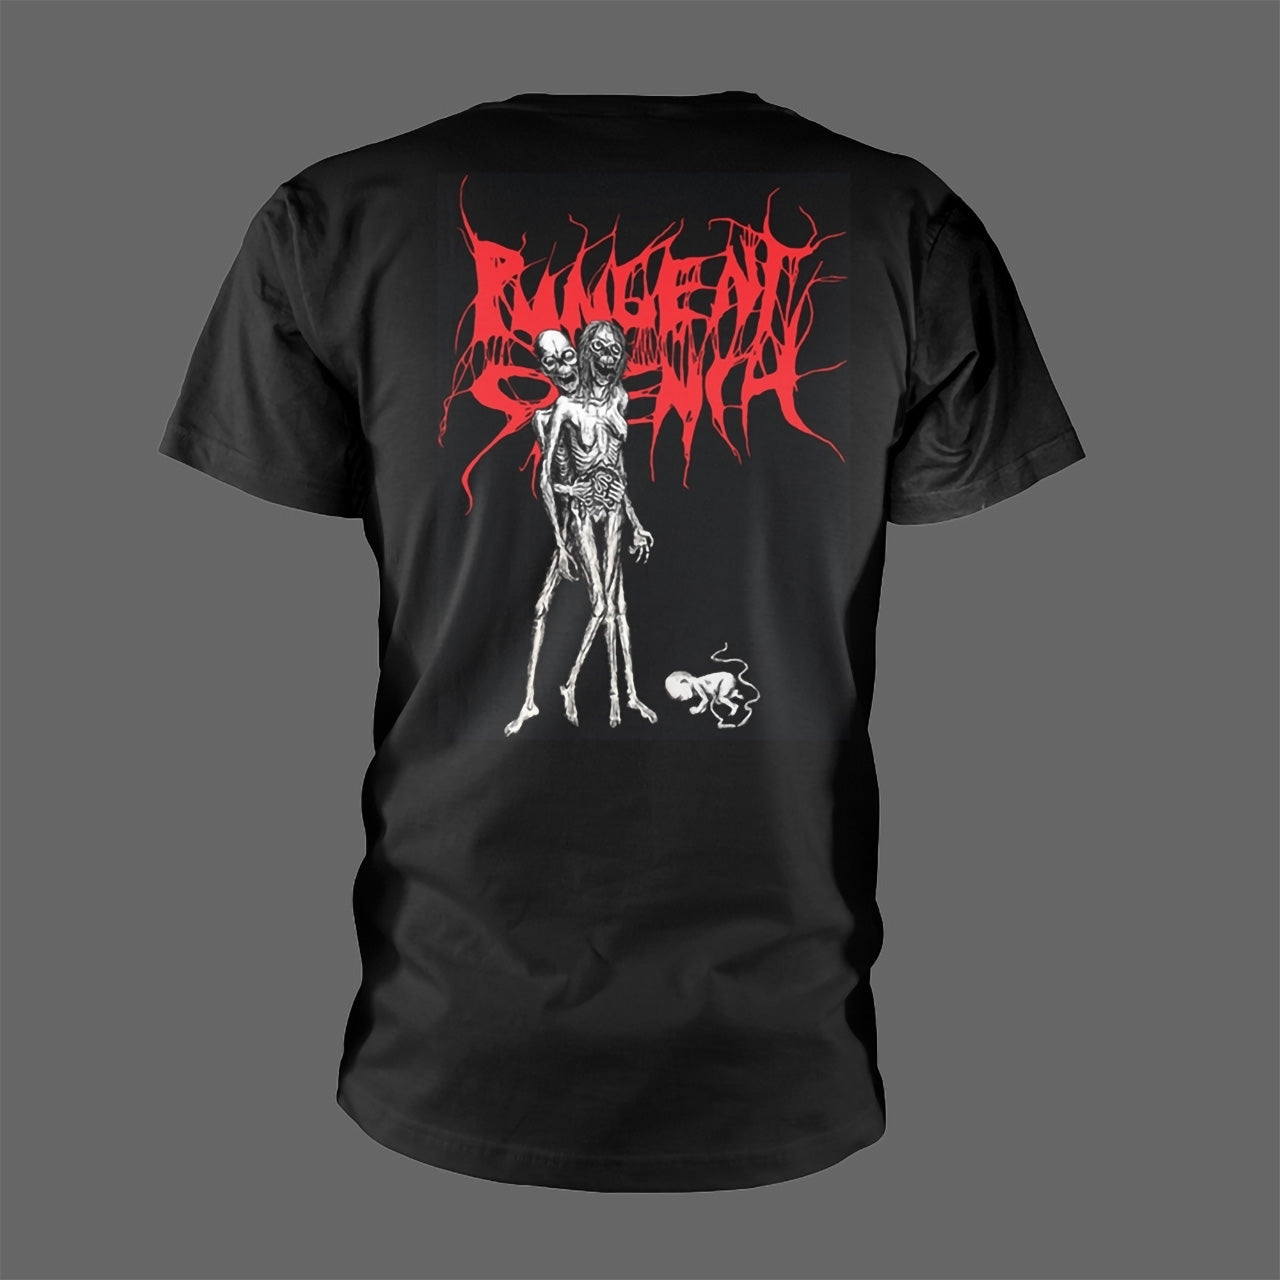 Pungent Stench - First Recordings (T-Shirt)